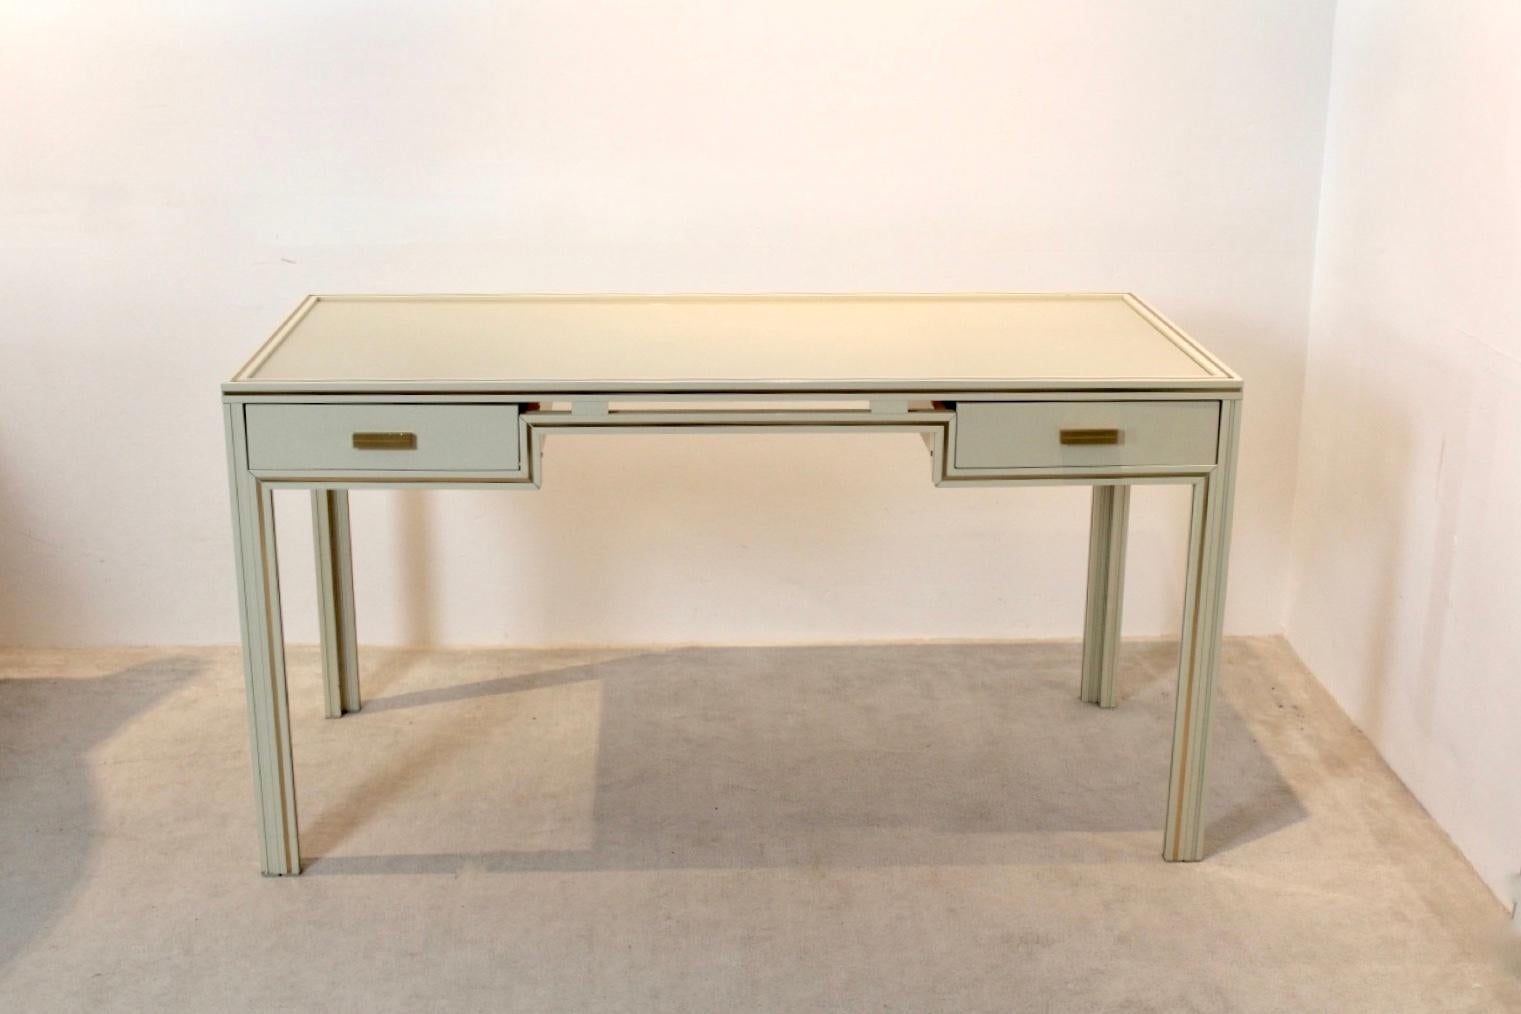 Unique Pierre Vandel Paris cream lacquered French desk made from aluminum and glass. In cream aluminium with beautiful Gold accents. Featuring two drawers and glass tier. With some light wear due to age and use. Pierre Vandel was a French interior